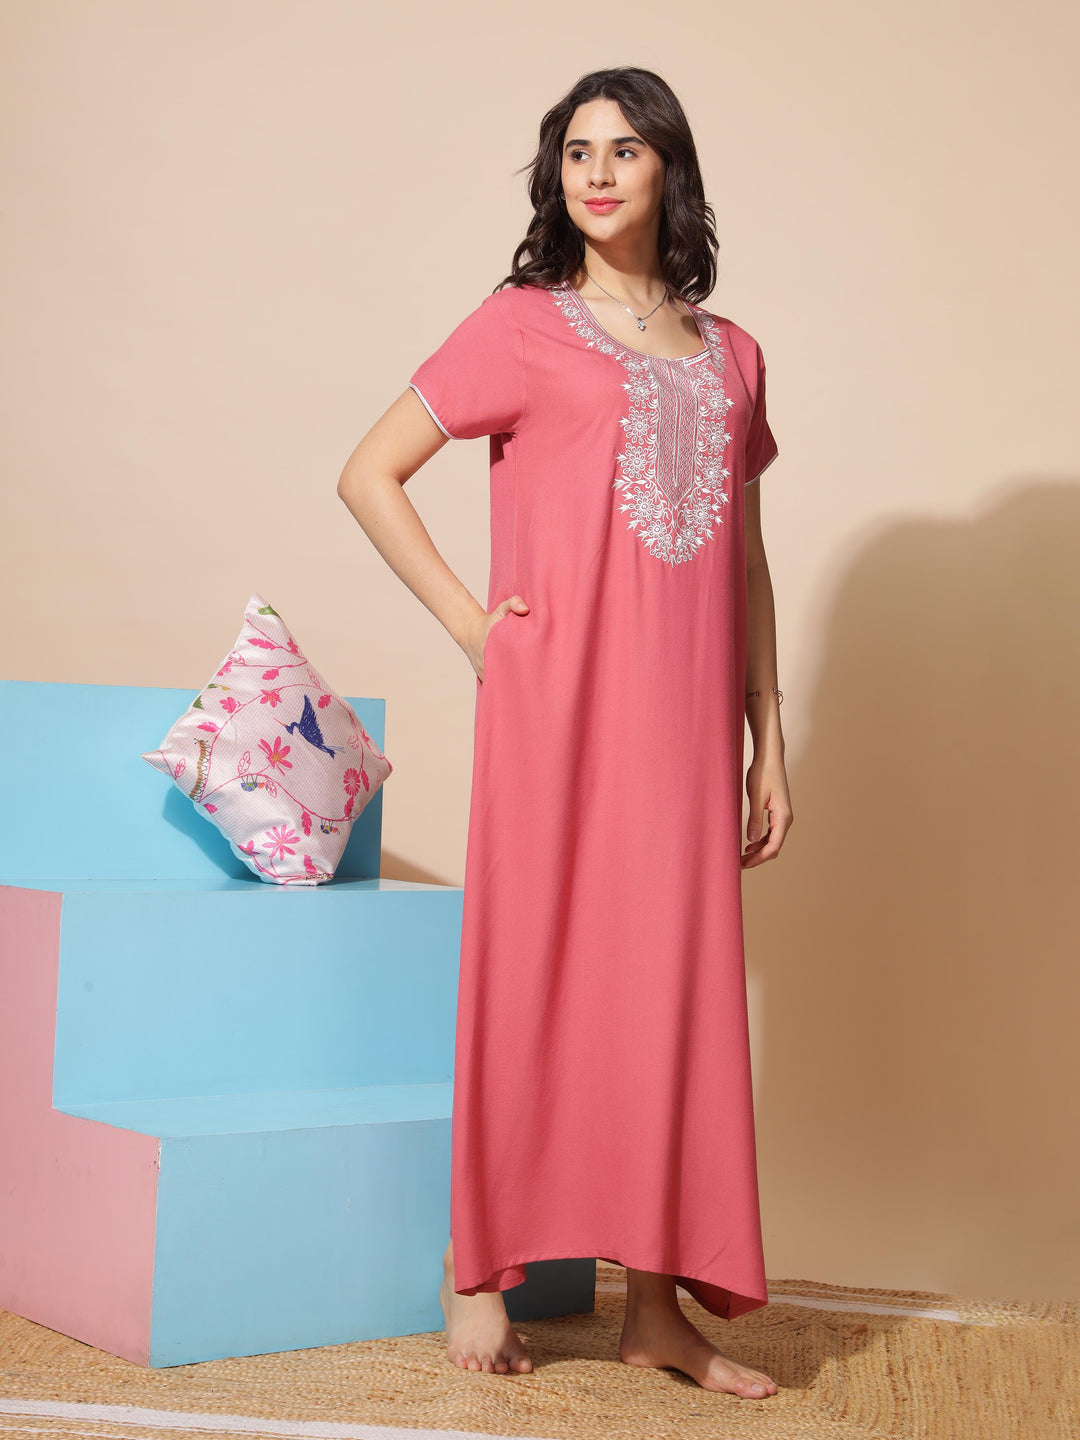 Chic Rust Embroidered A-Line Nighty - Comfortable Sleepwear